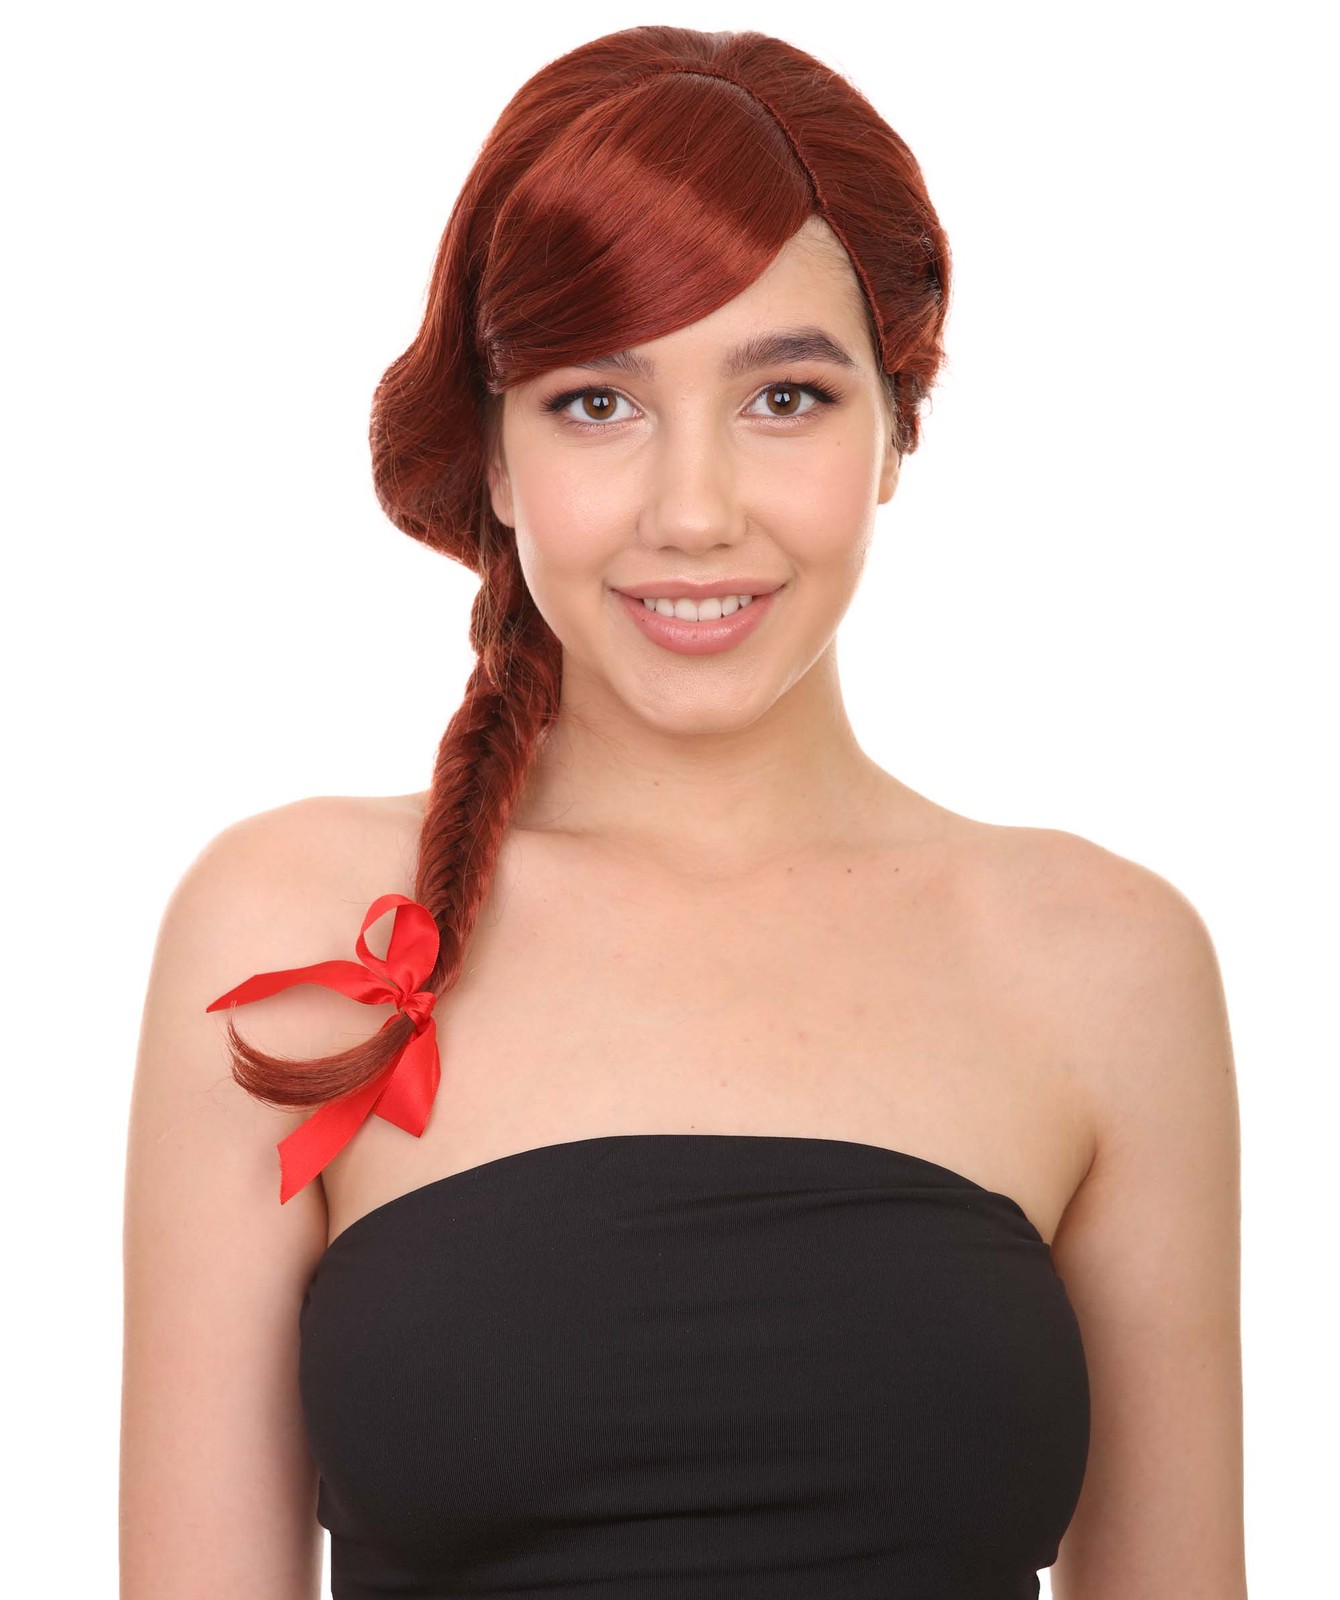 Farmers Daughter Long Braids Womens Wig | Brown Colonial Traditional Cosplay - $29.85